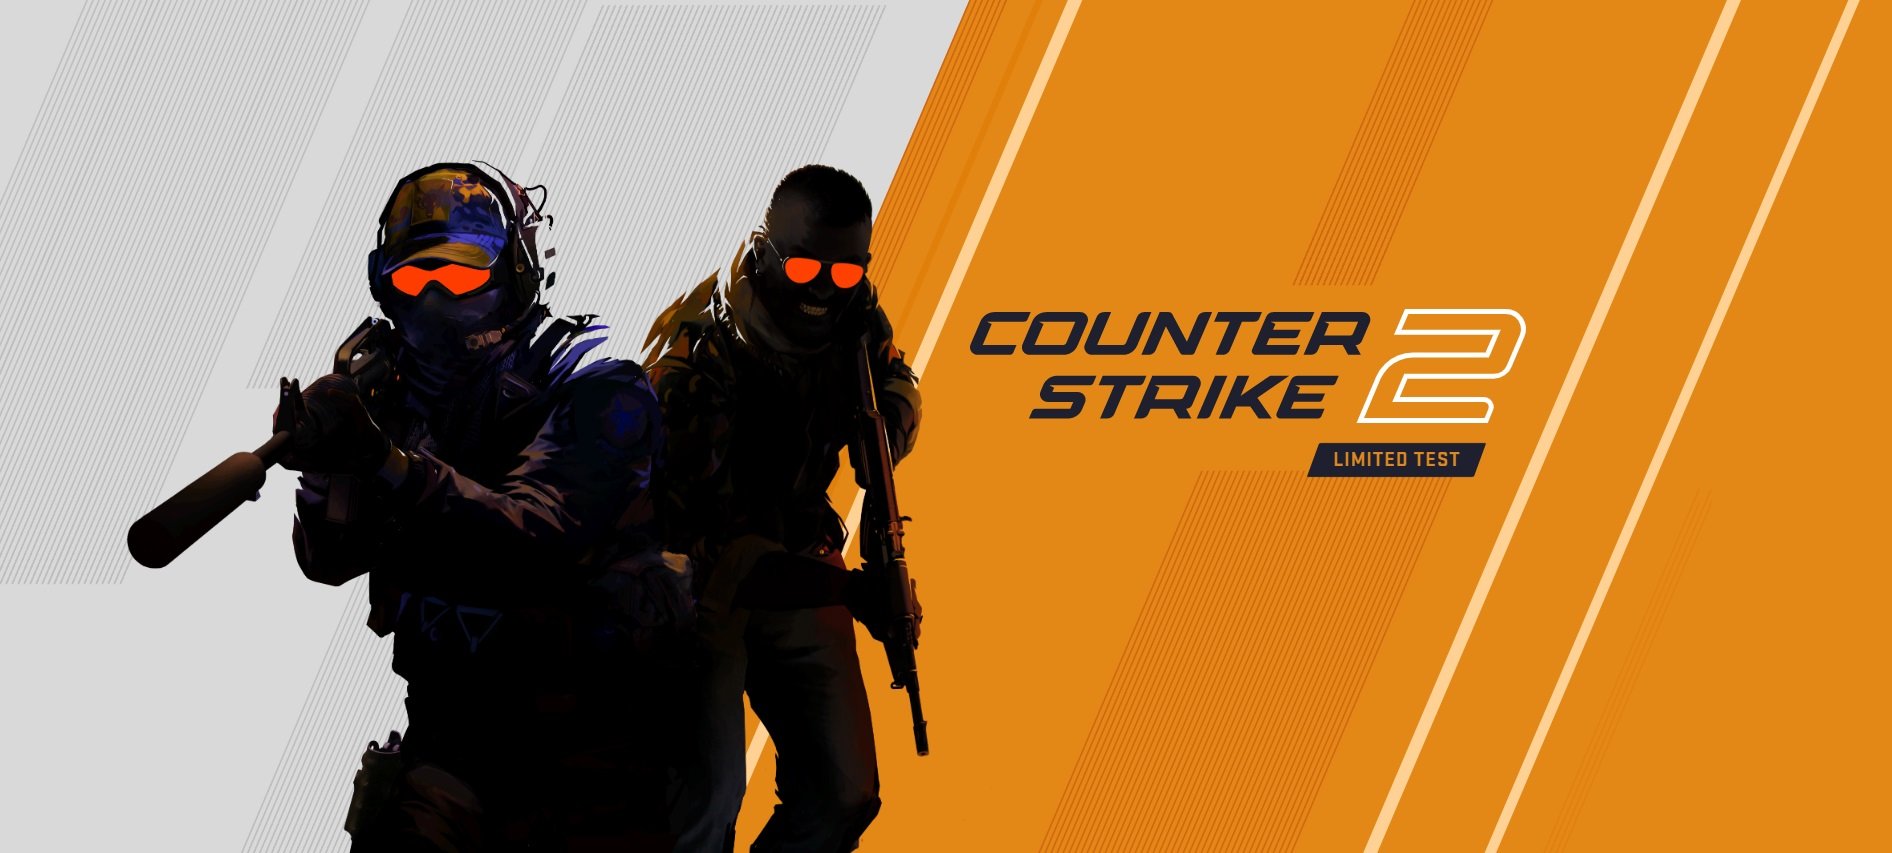 Counter-Strike 2 has been revealed ahead of a summer 2023 release | VGC